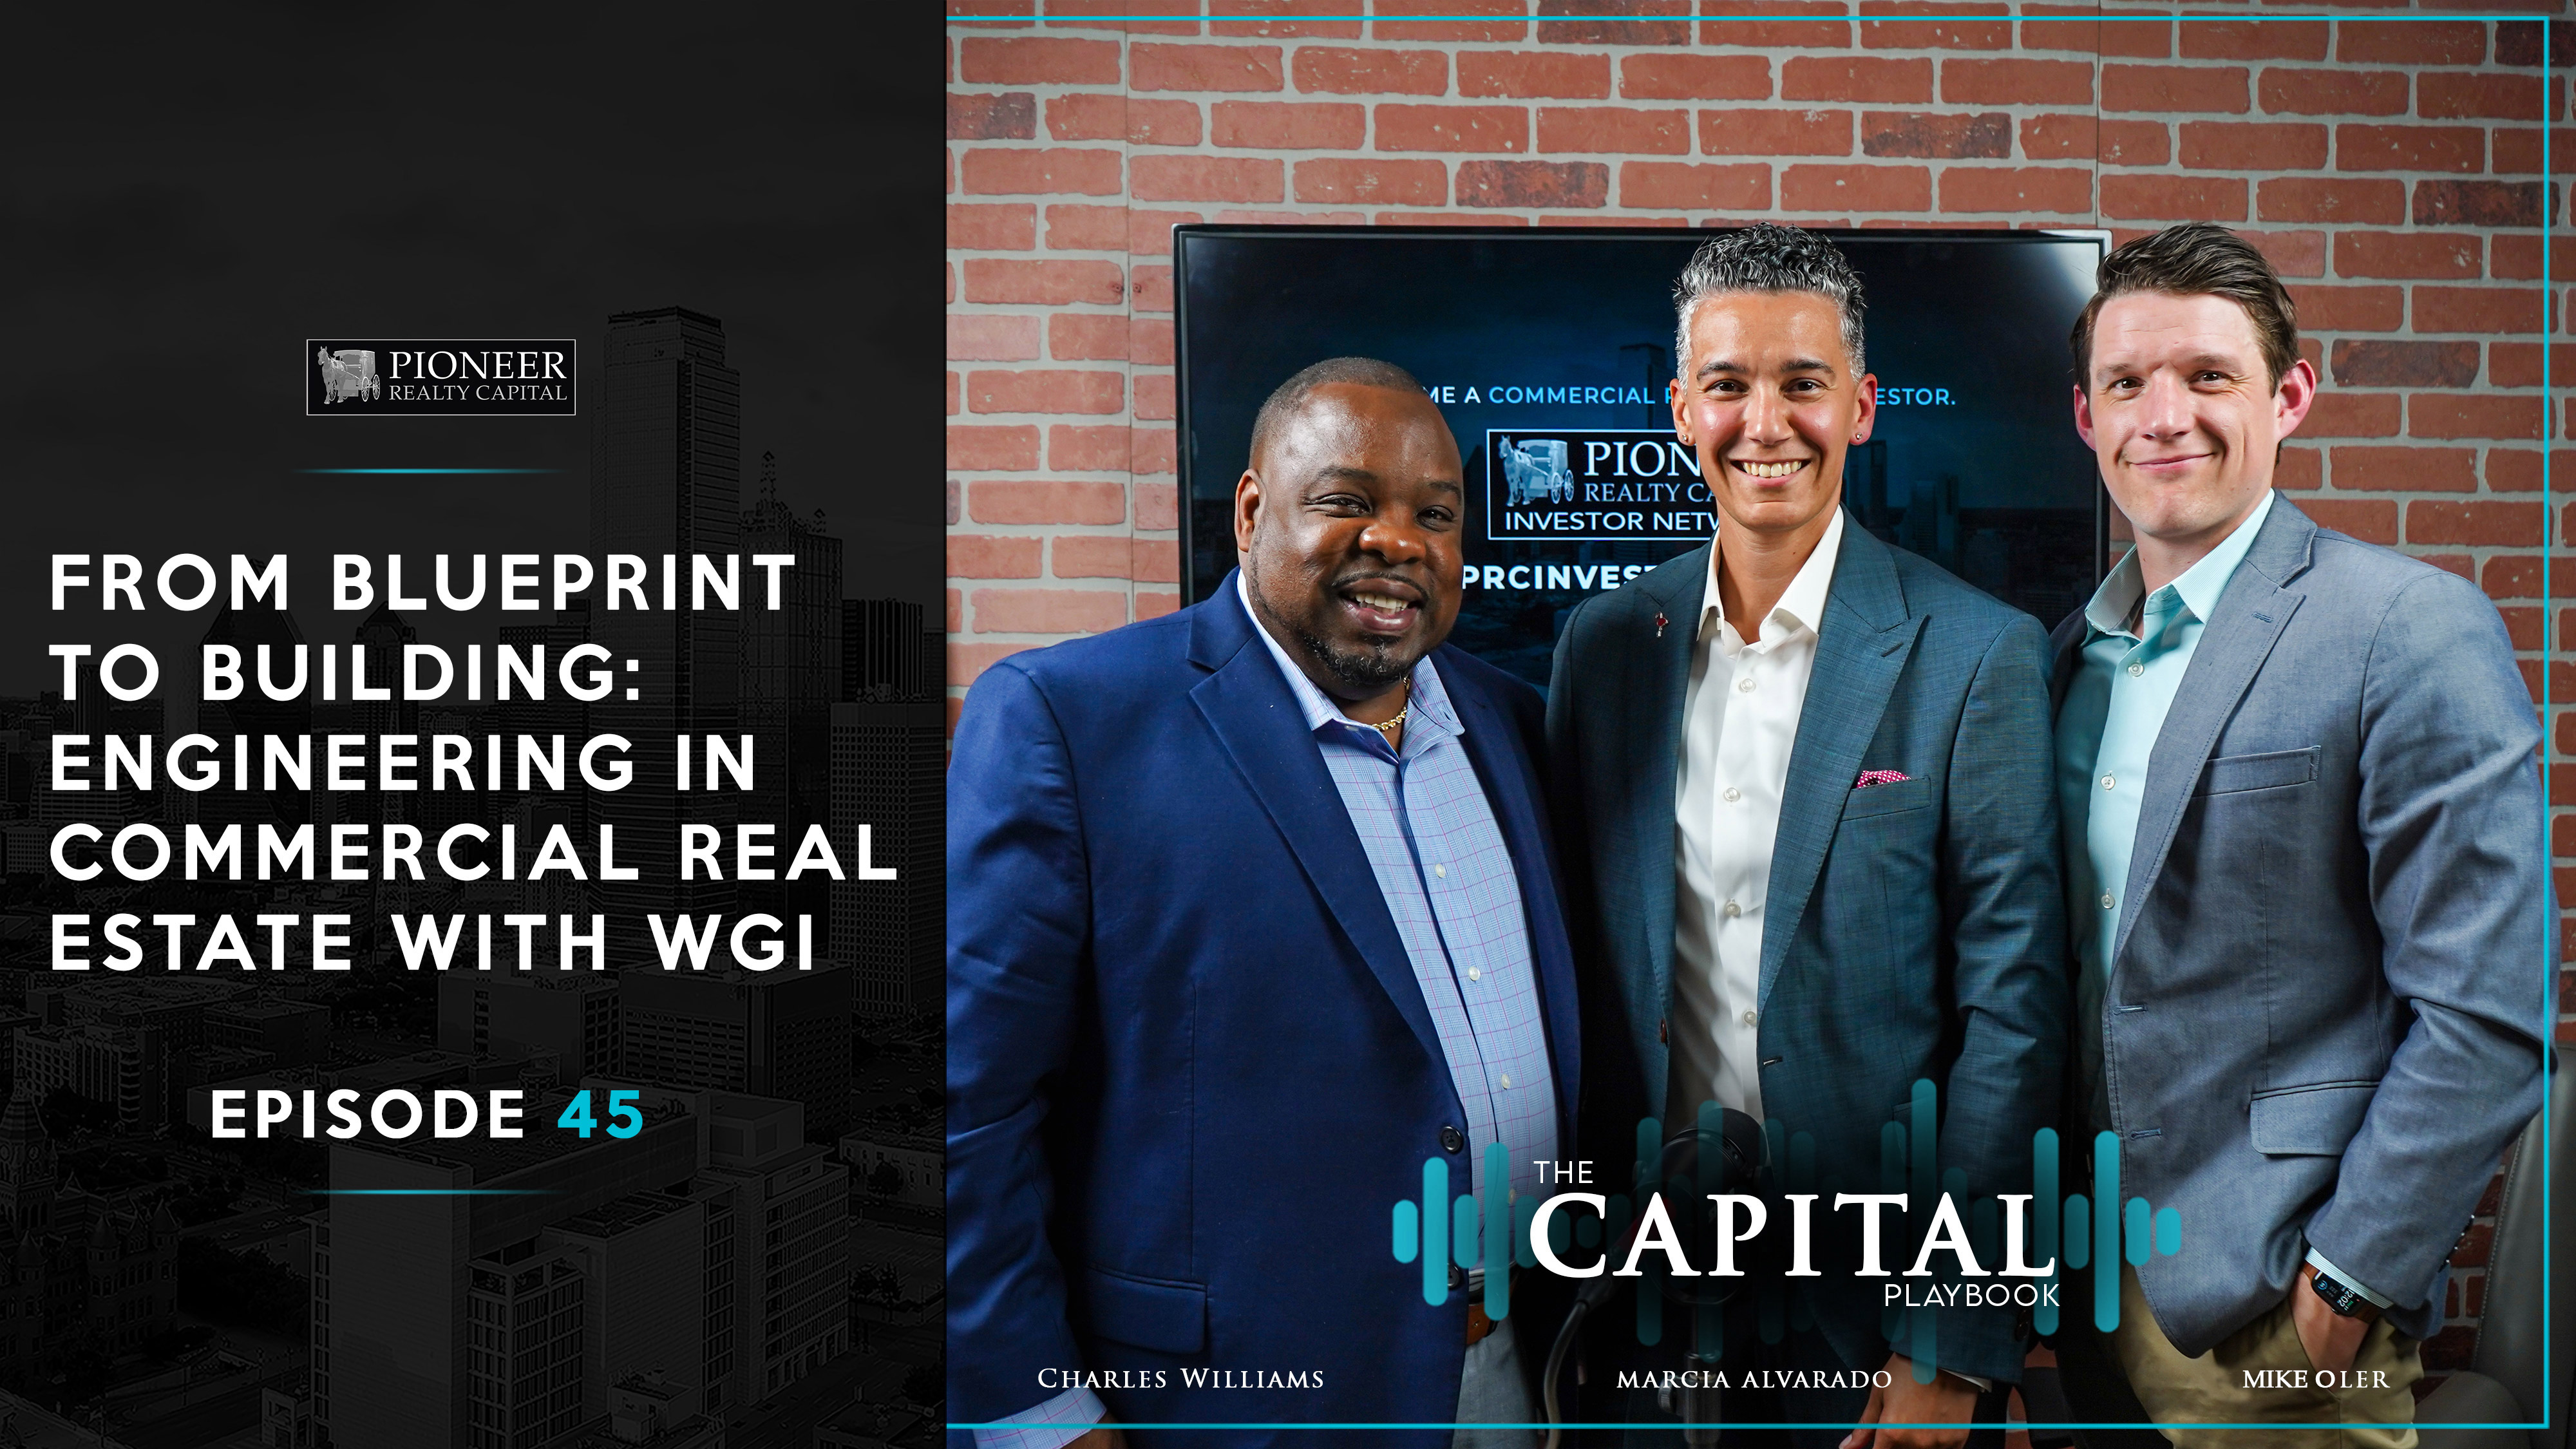 WGI Experts Discuss Engineering in Commercial Real Estate on The Capital Playbook Podcast